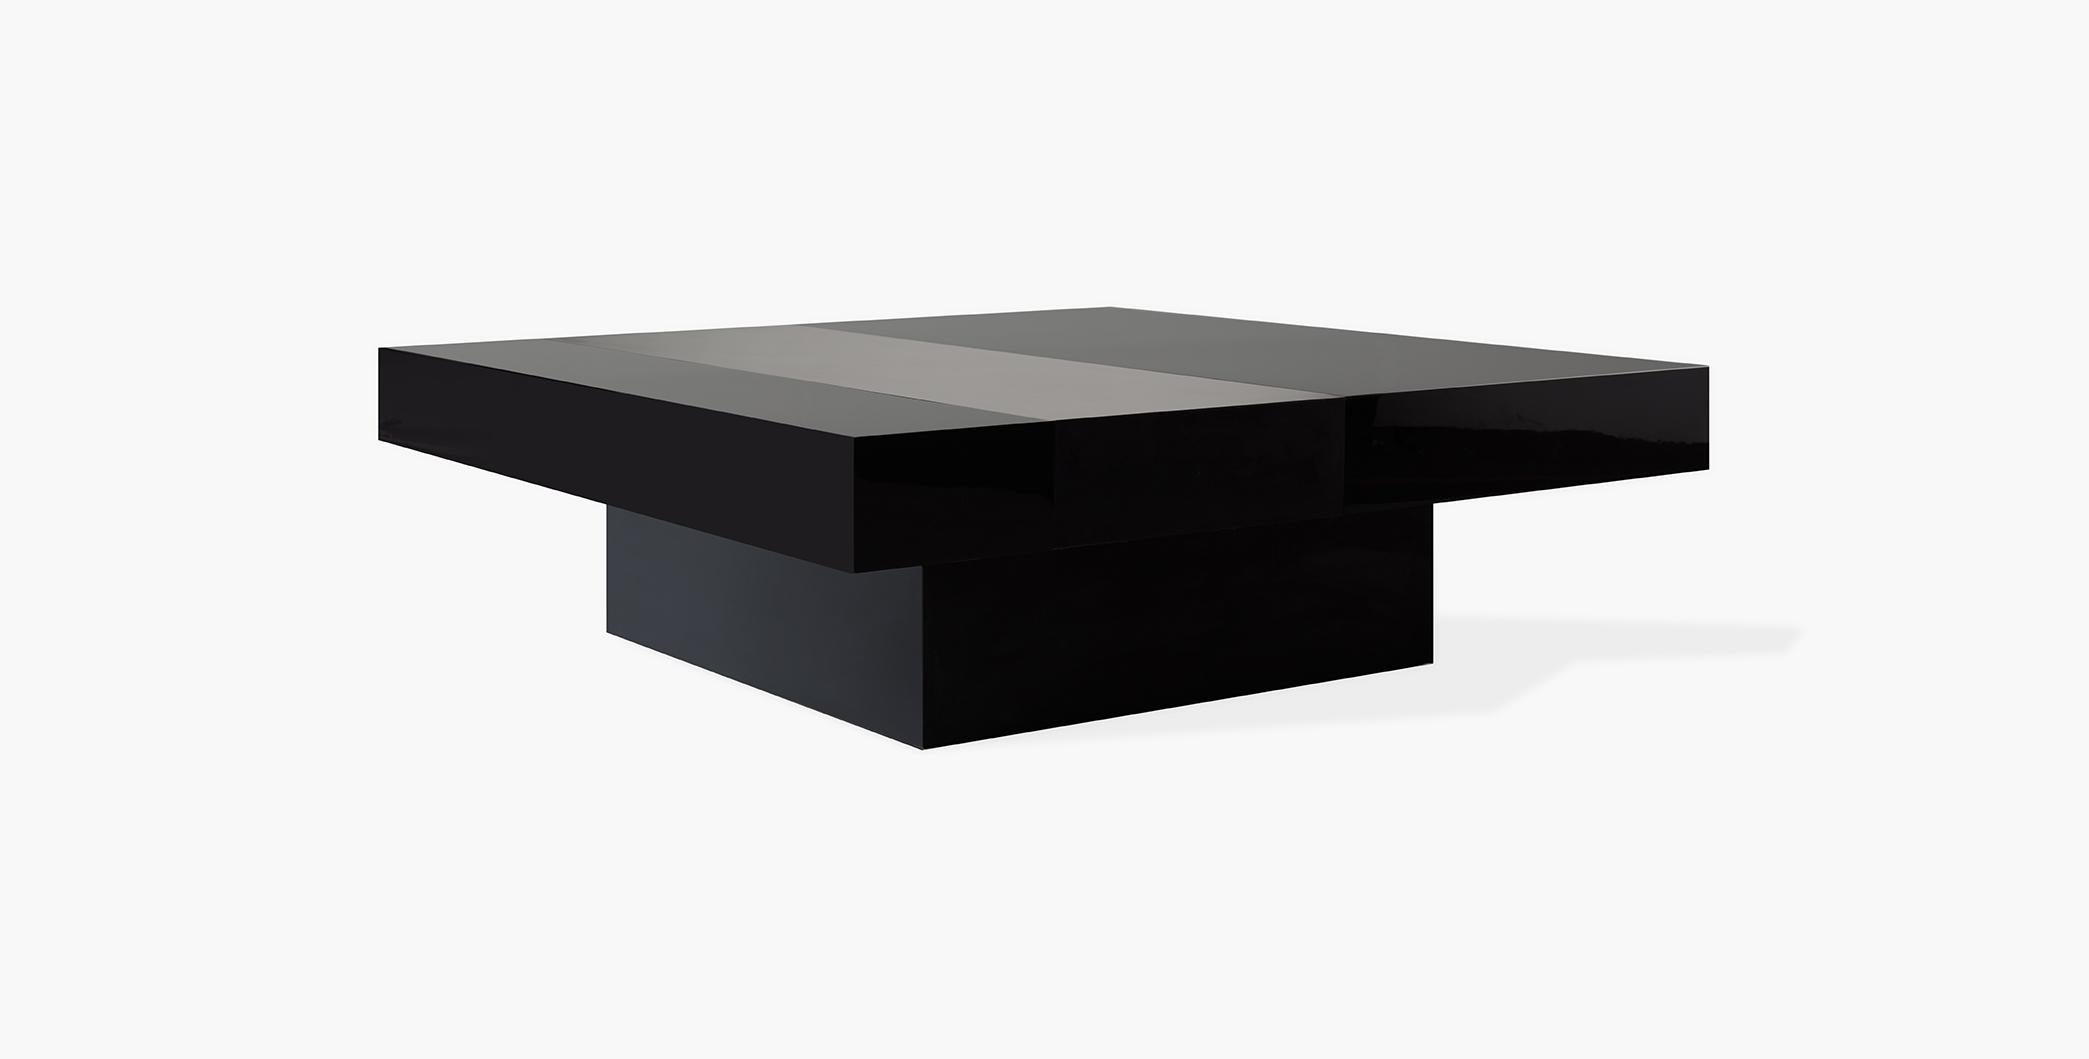 The plinth base square silhouette of the Hawke coffee table combines both a minimalistic form with riveting features such as high sheen lacquer and a brass inlay detail with Verde finish.
 